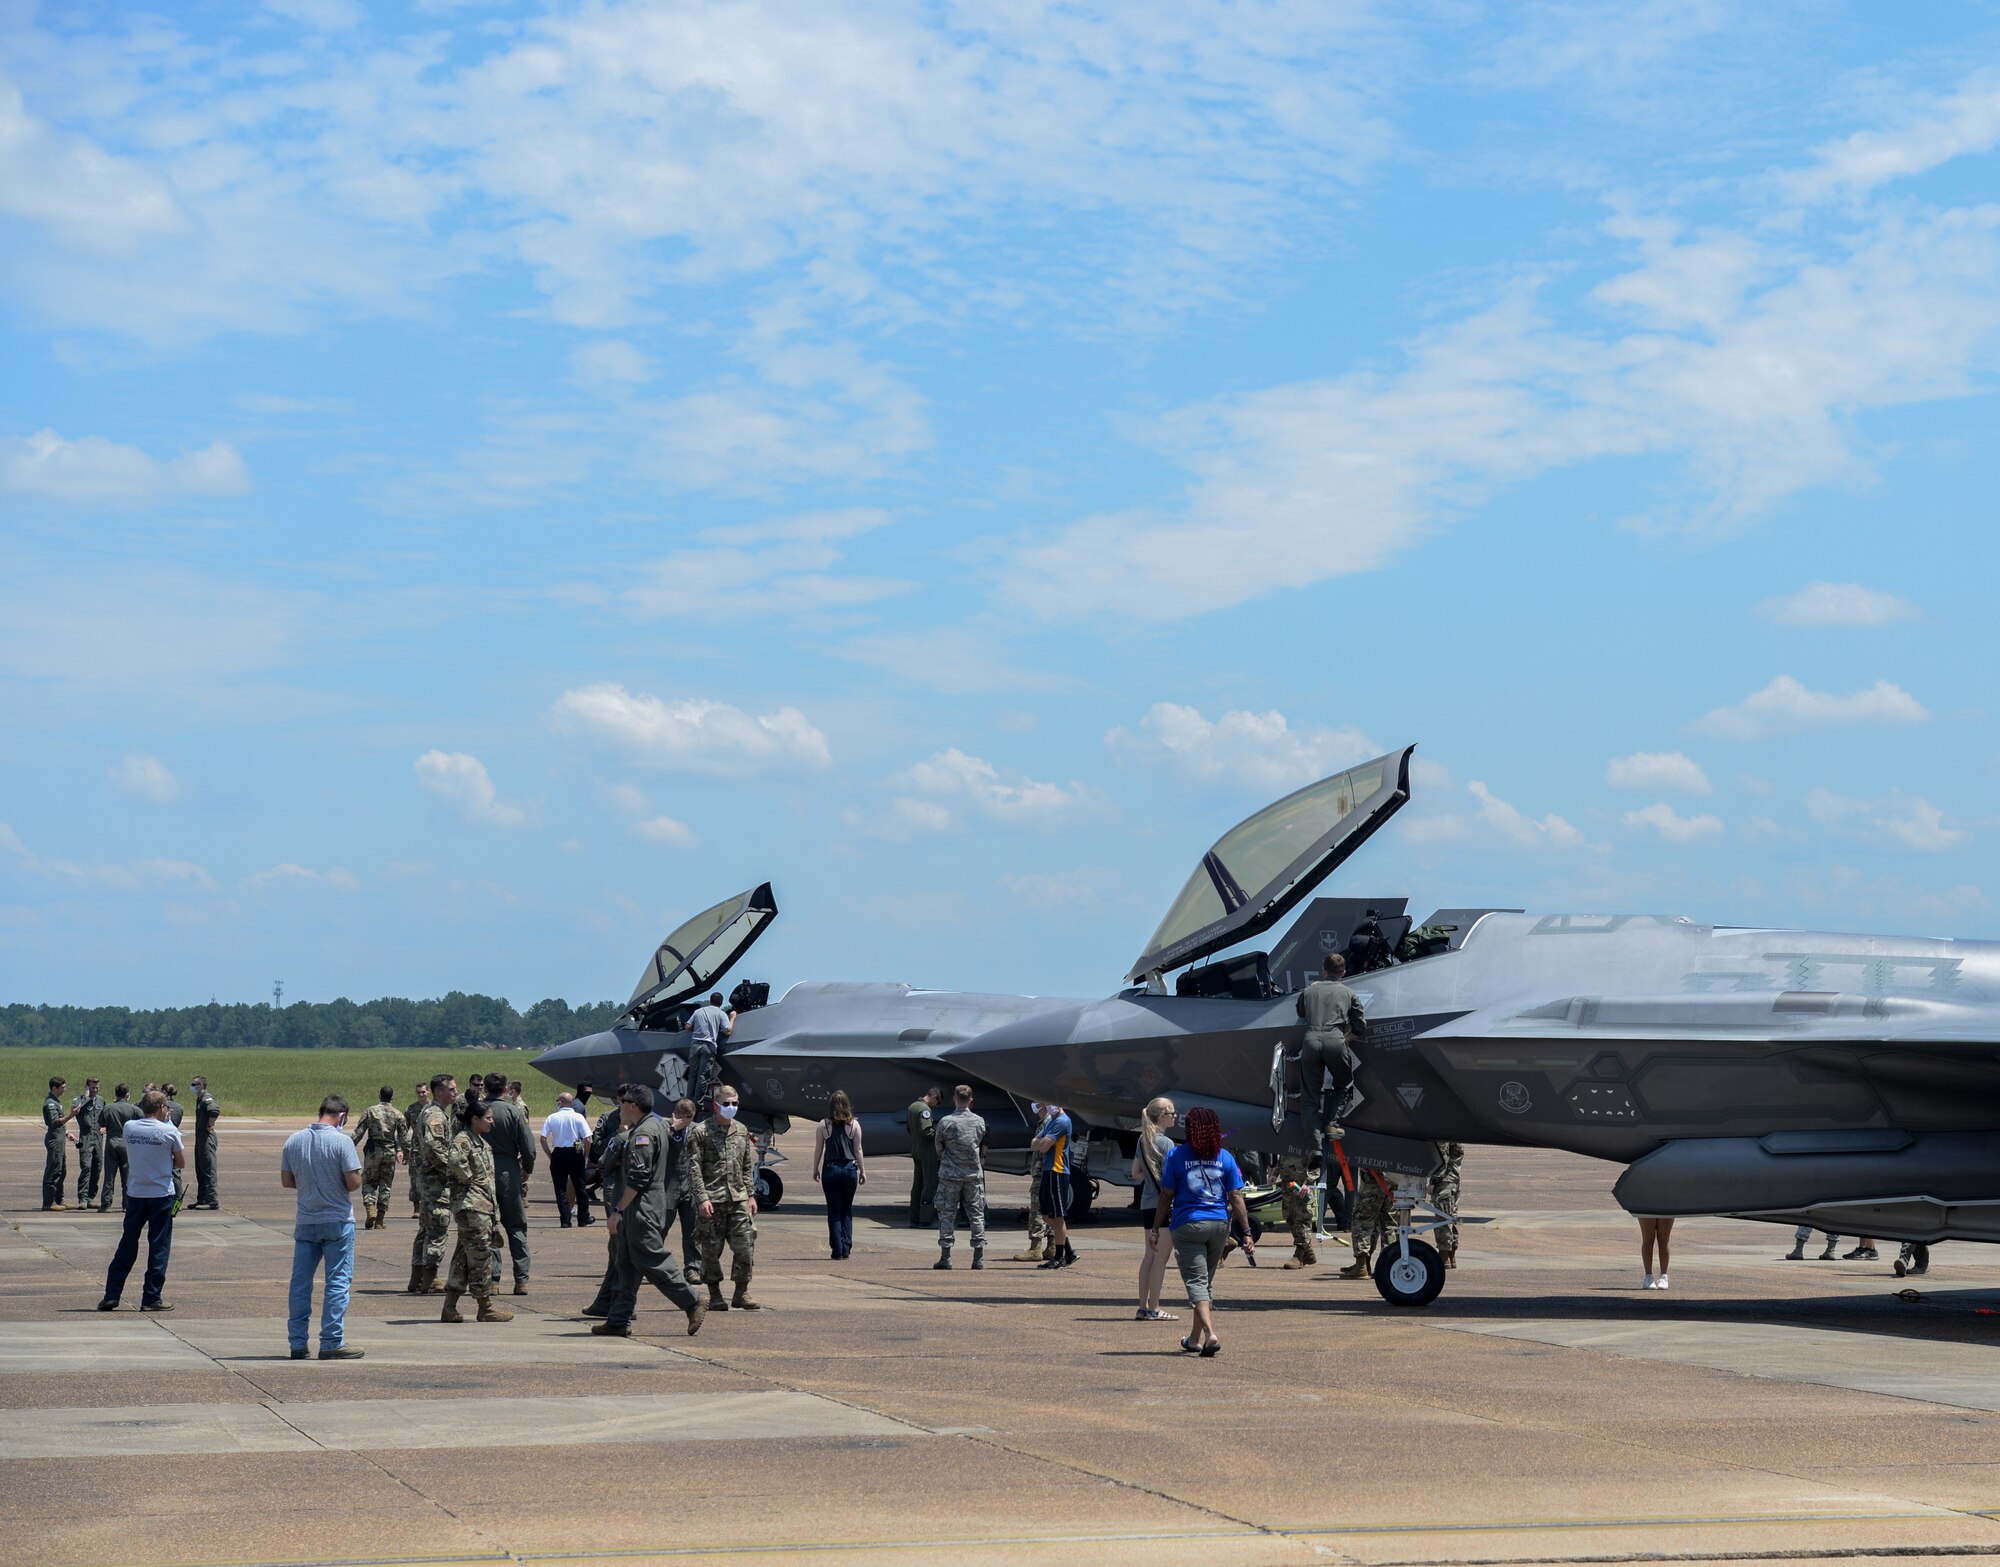 Columbus Air Force Base hosted a static display for Columbus AFB Airmen and their families on August 7, 2020, at Columbus AFB, Miss. (U.S. Air Force photo by Airman 1st Class Davis Donaldson)